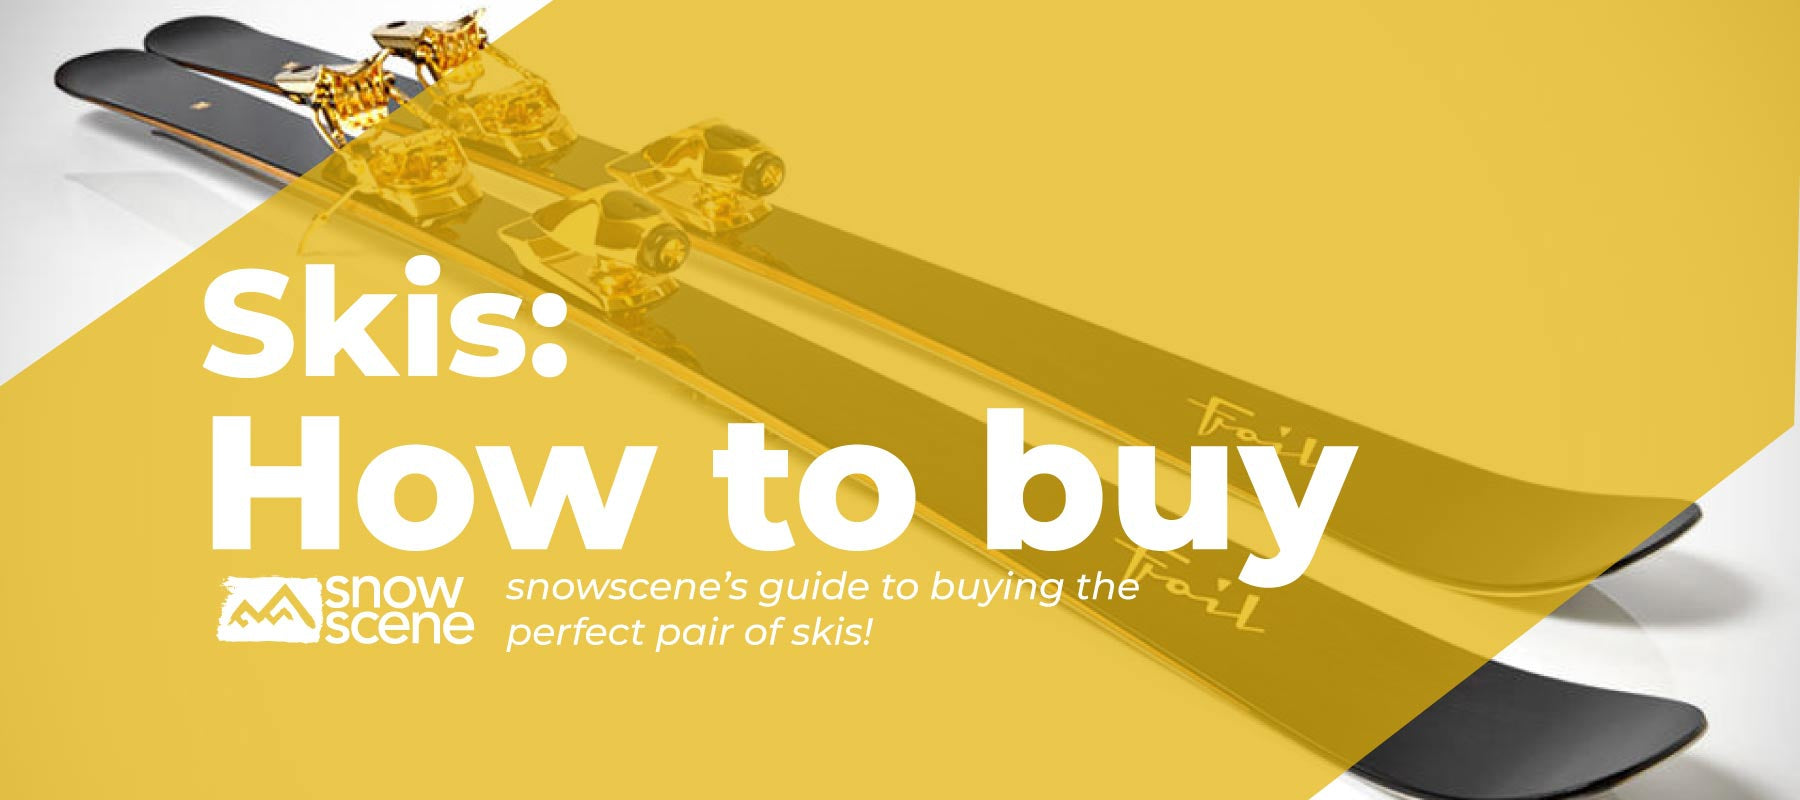 Guide to Buying your Perfect Pair of Skis-snowscene ski and board